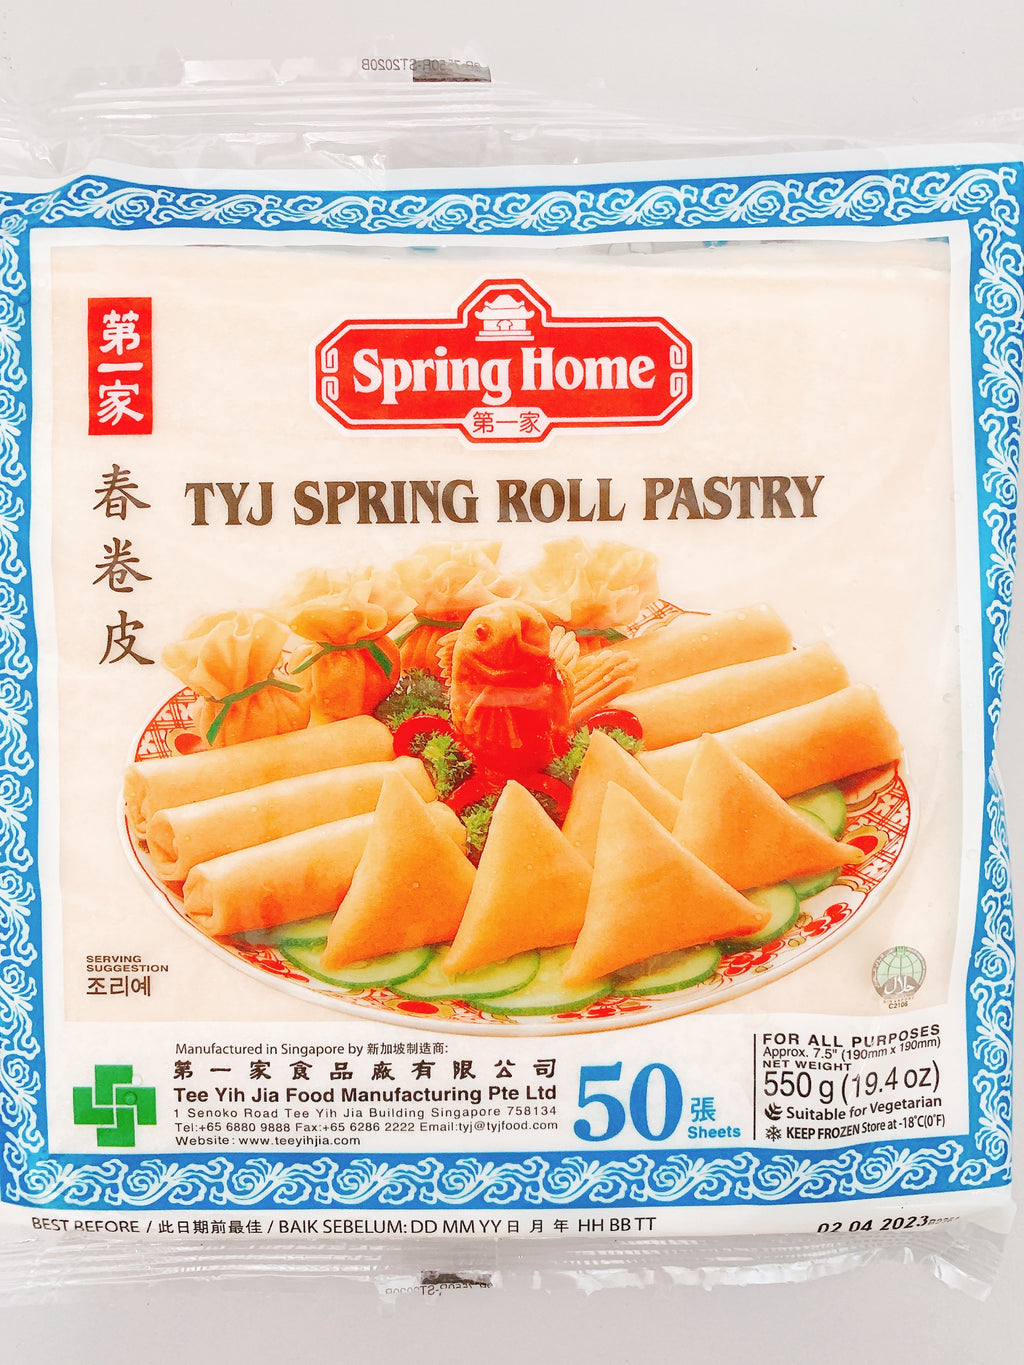 Spring Home - Spring Roll Pastry 50 Sheets (550g)